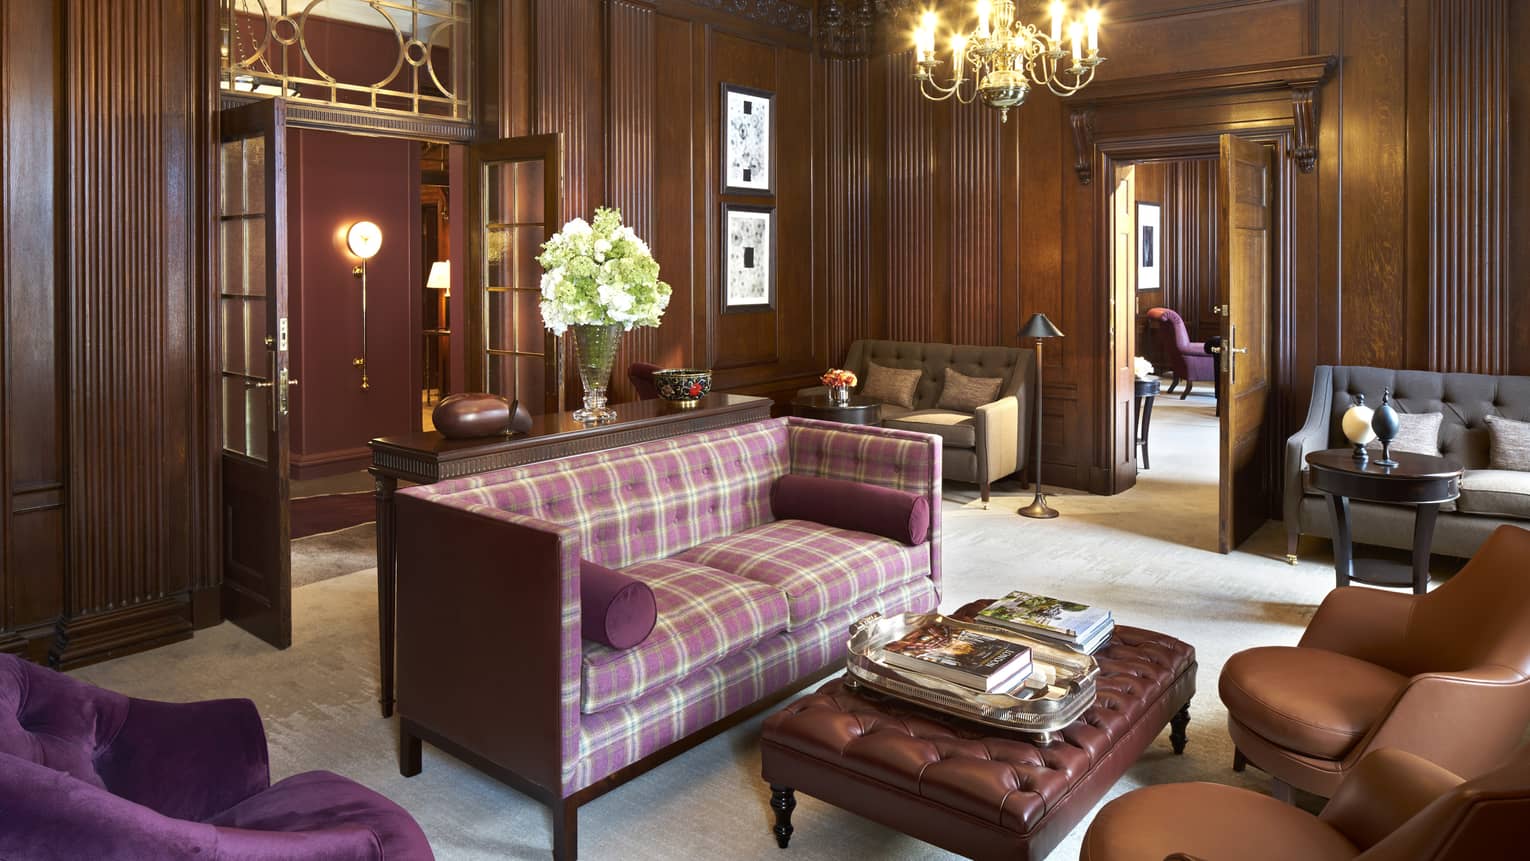 Purple plaid loveseat, velvet and leather armchairs, bench in room with dark wood panel walls